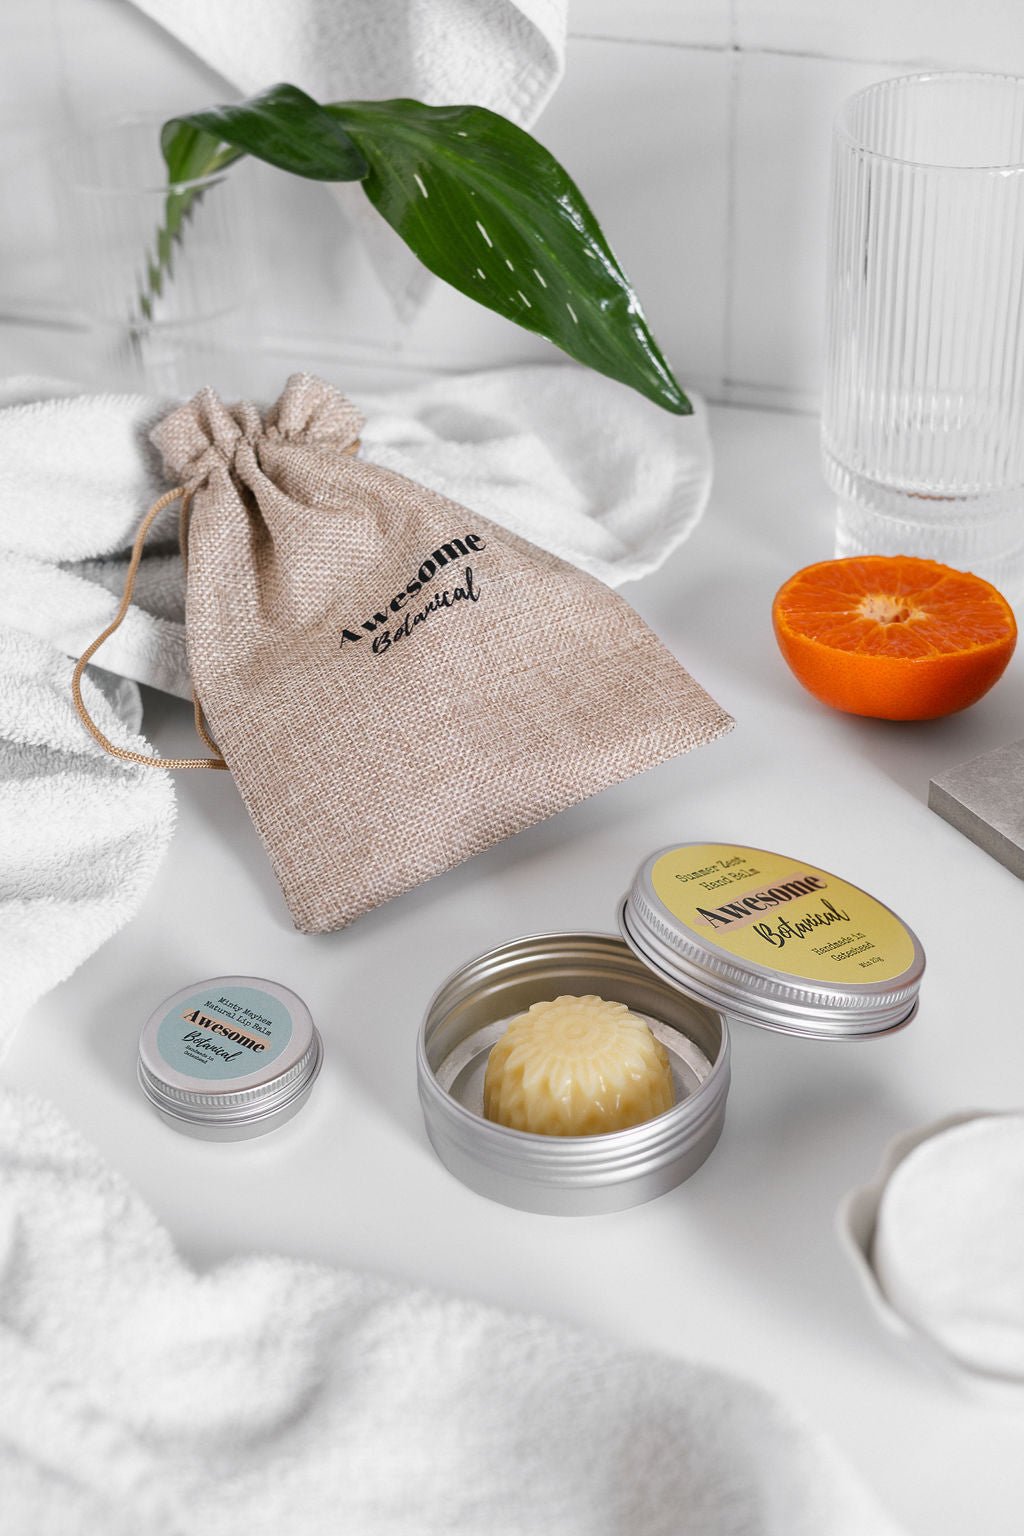 Hessian Awesome Botanical Bag in bathroom with Lip Balm & Hand Balm surrounded by a plant and fresh orange 